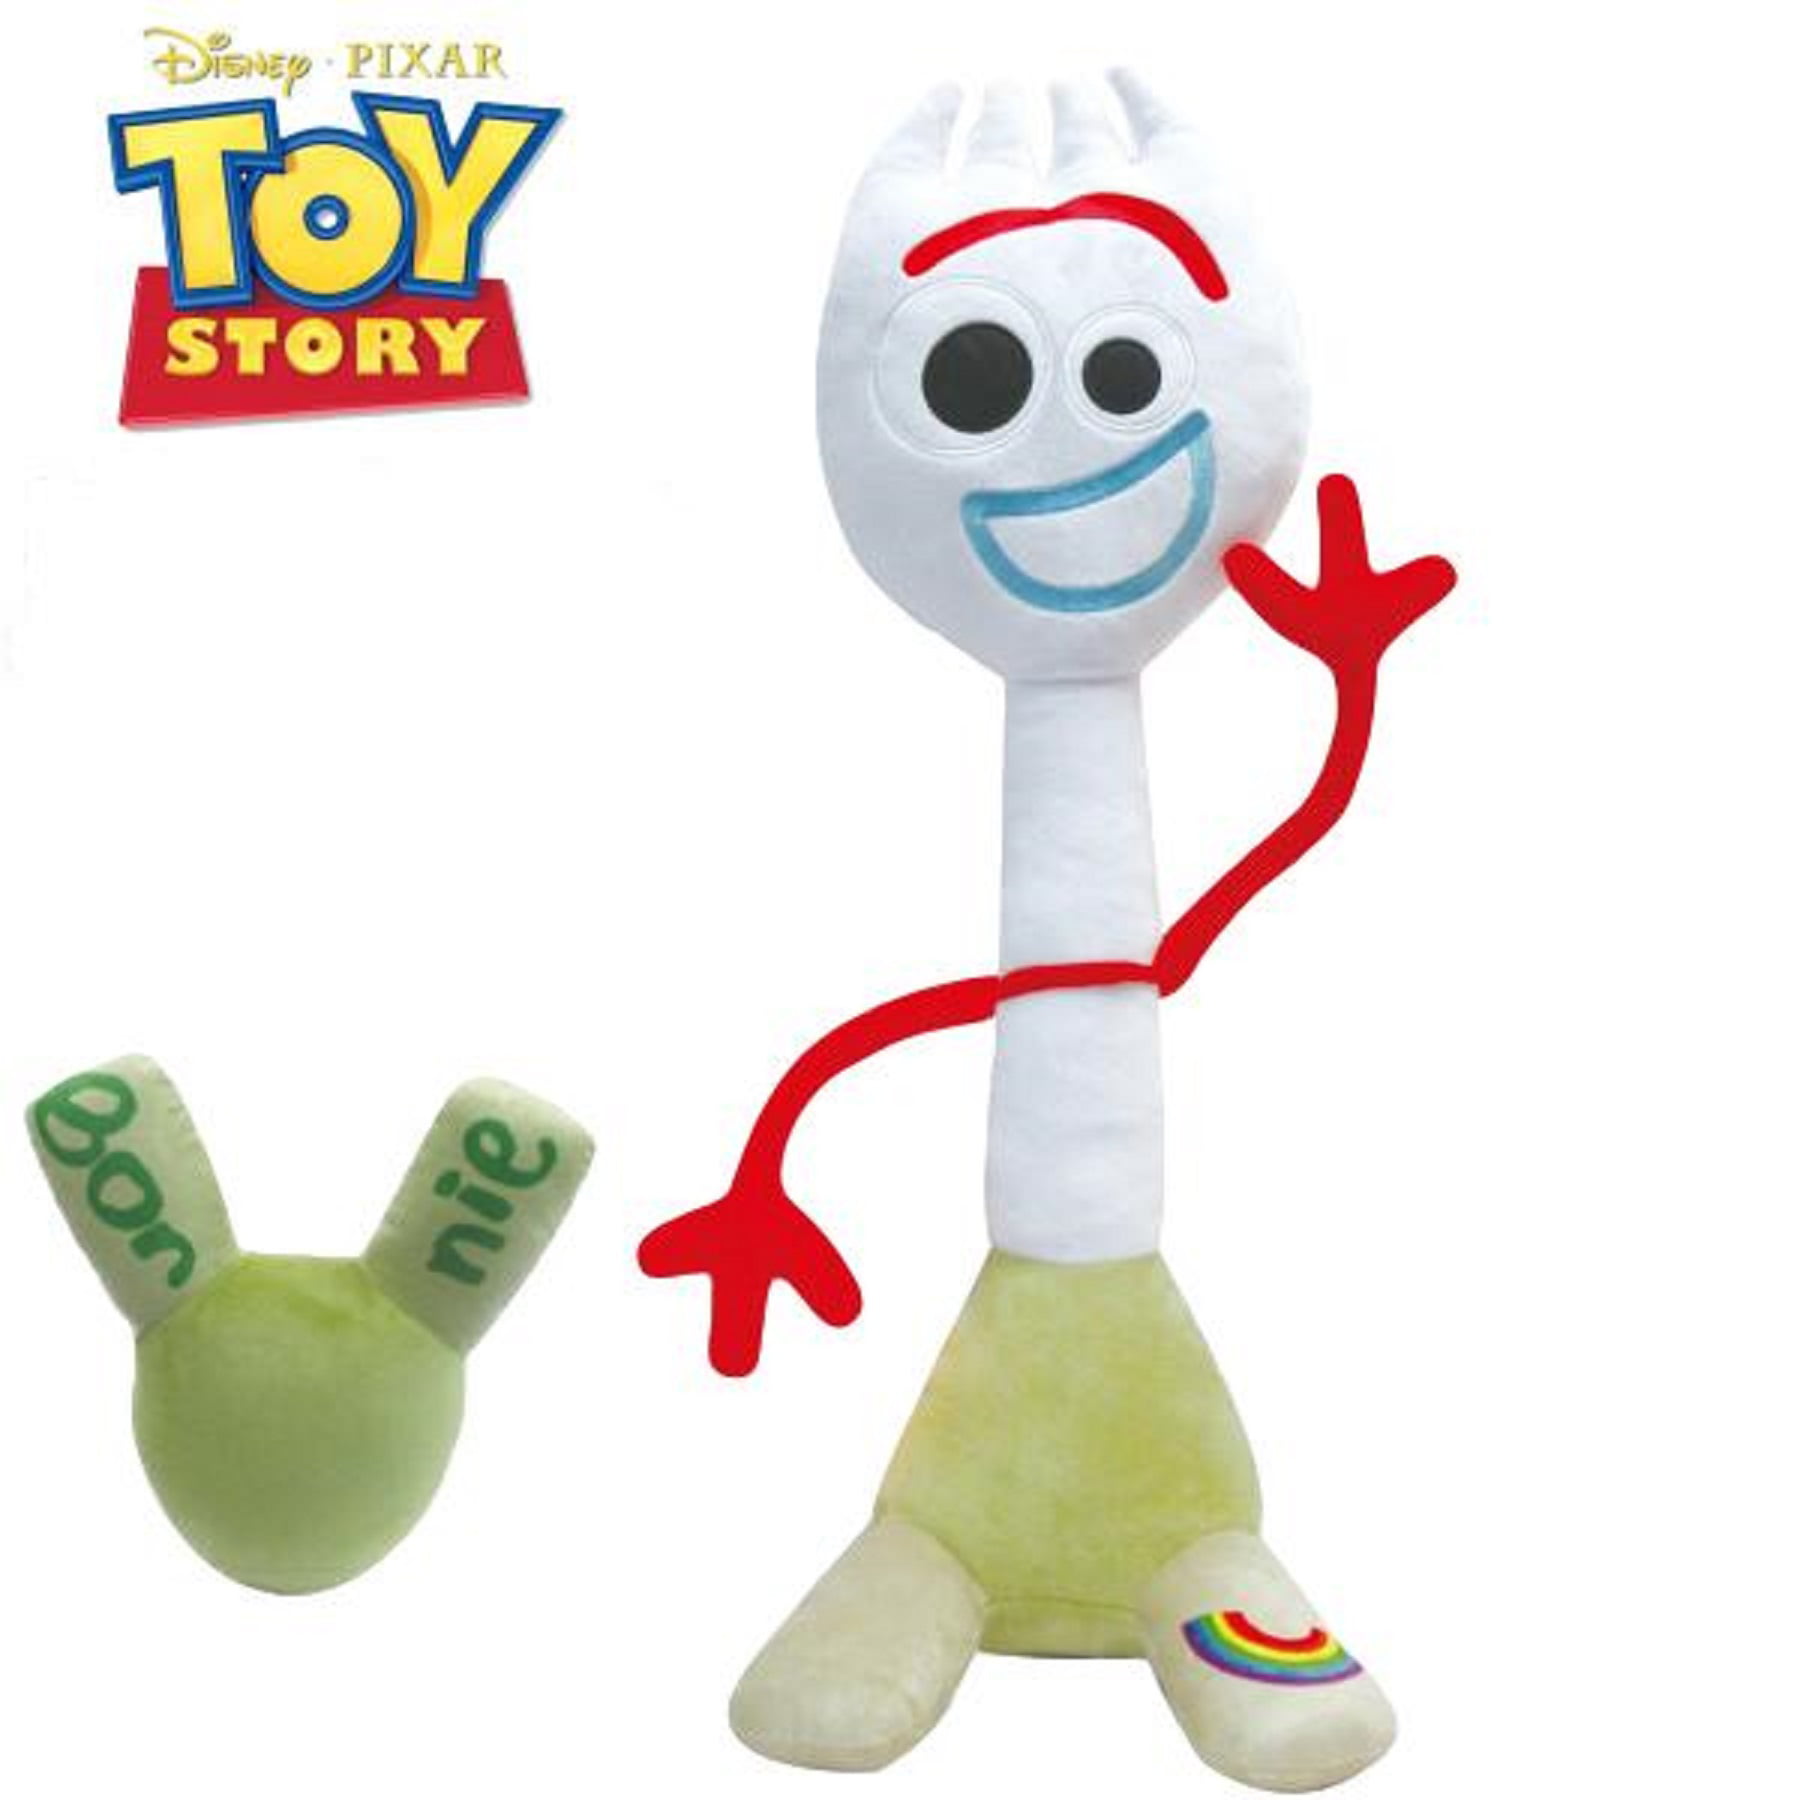 OFFICIAL DISNEY TOY STORY 4 FORKY LARGE 12" SOFT TOY PLUSH TEDDY NEW WITH TAGS 